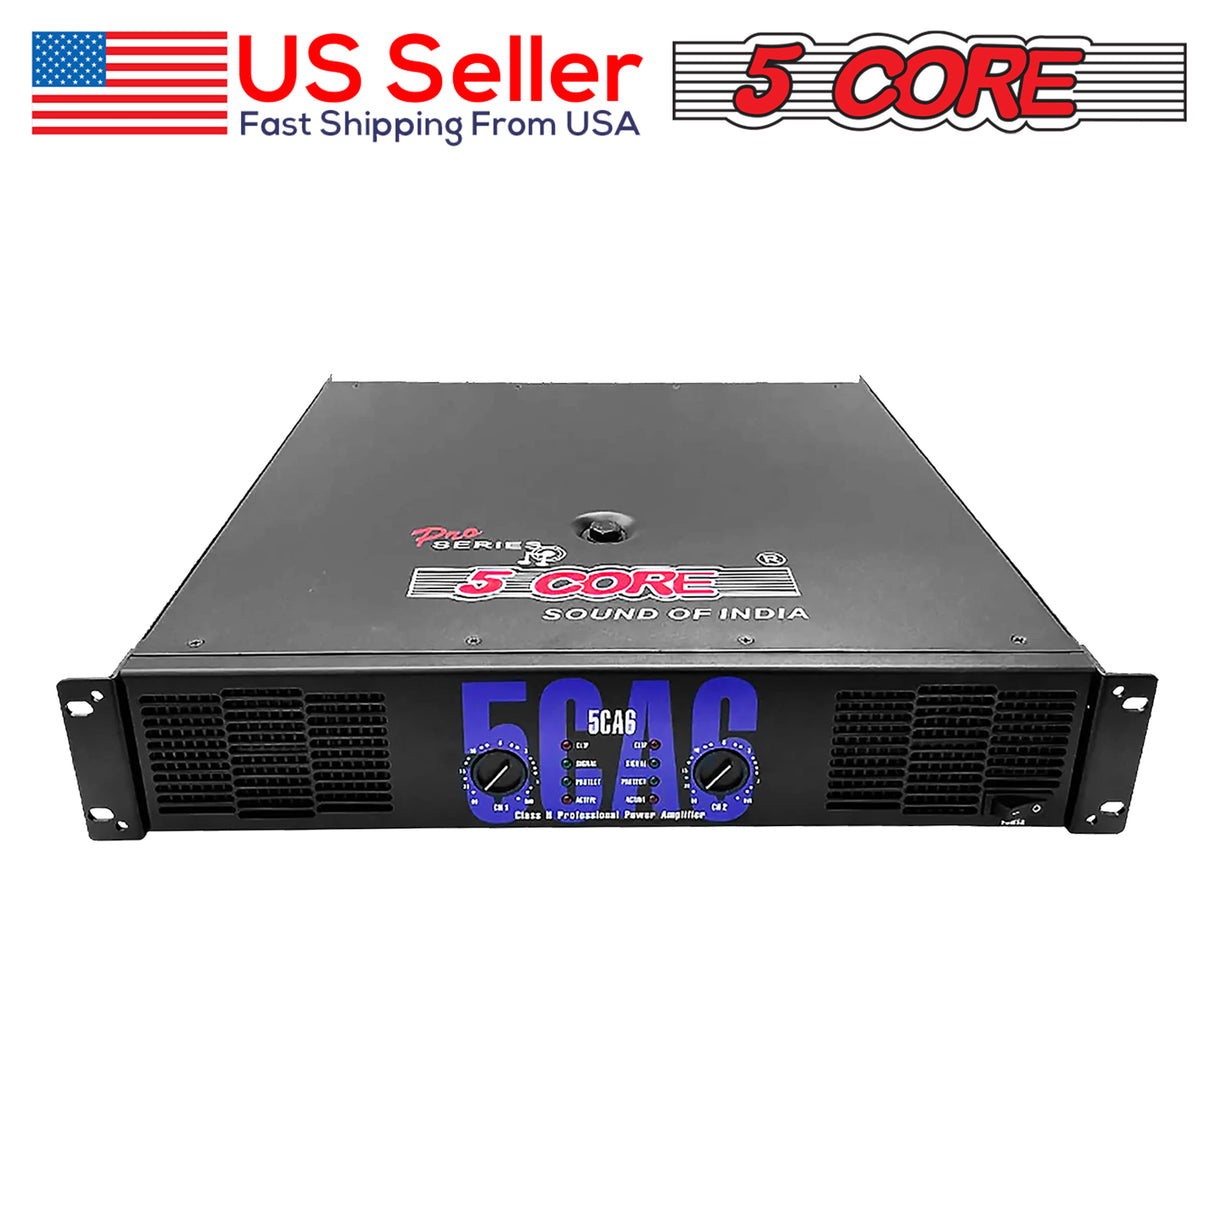 5 Core Power Amplifier – 900W Peak Output Amplifier for Experts and DJ, Professional 2U Chassis High Powered AMP with XLR Input, Master Volume Controller- CA 6